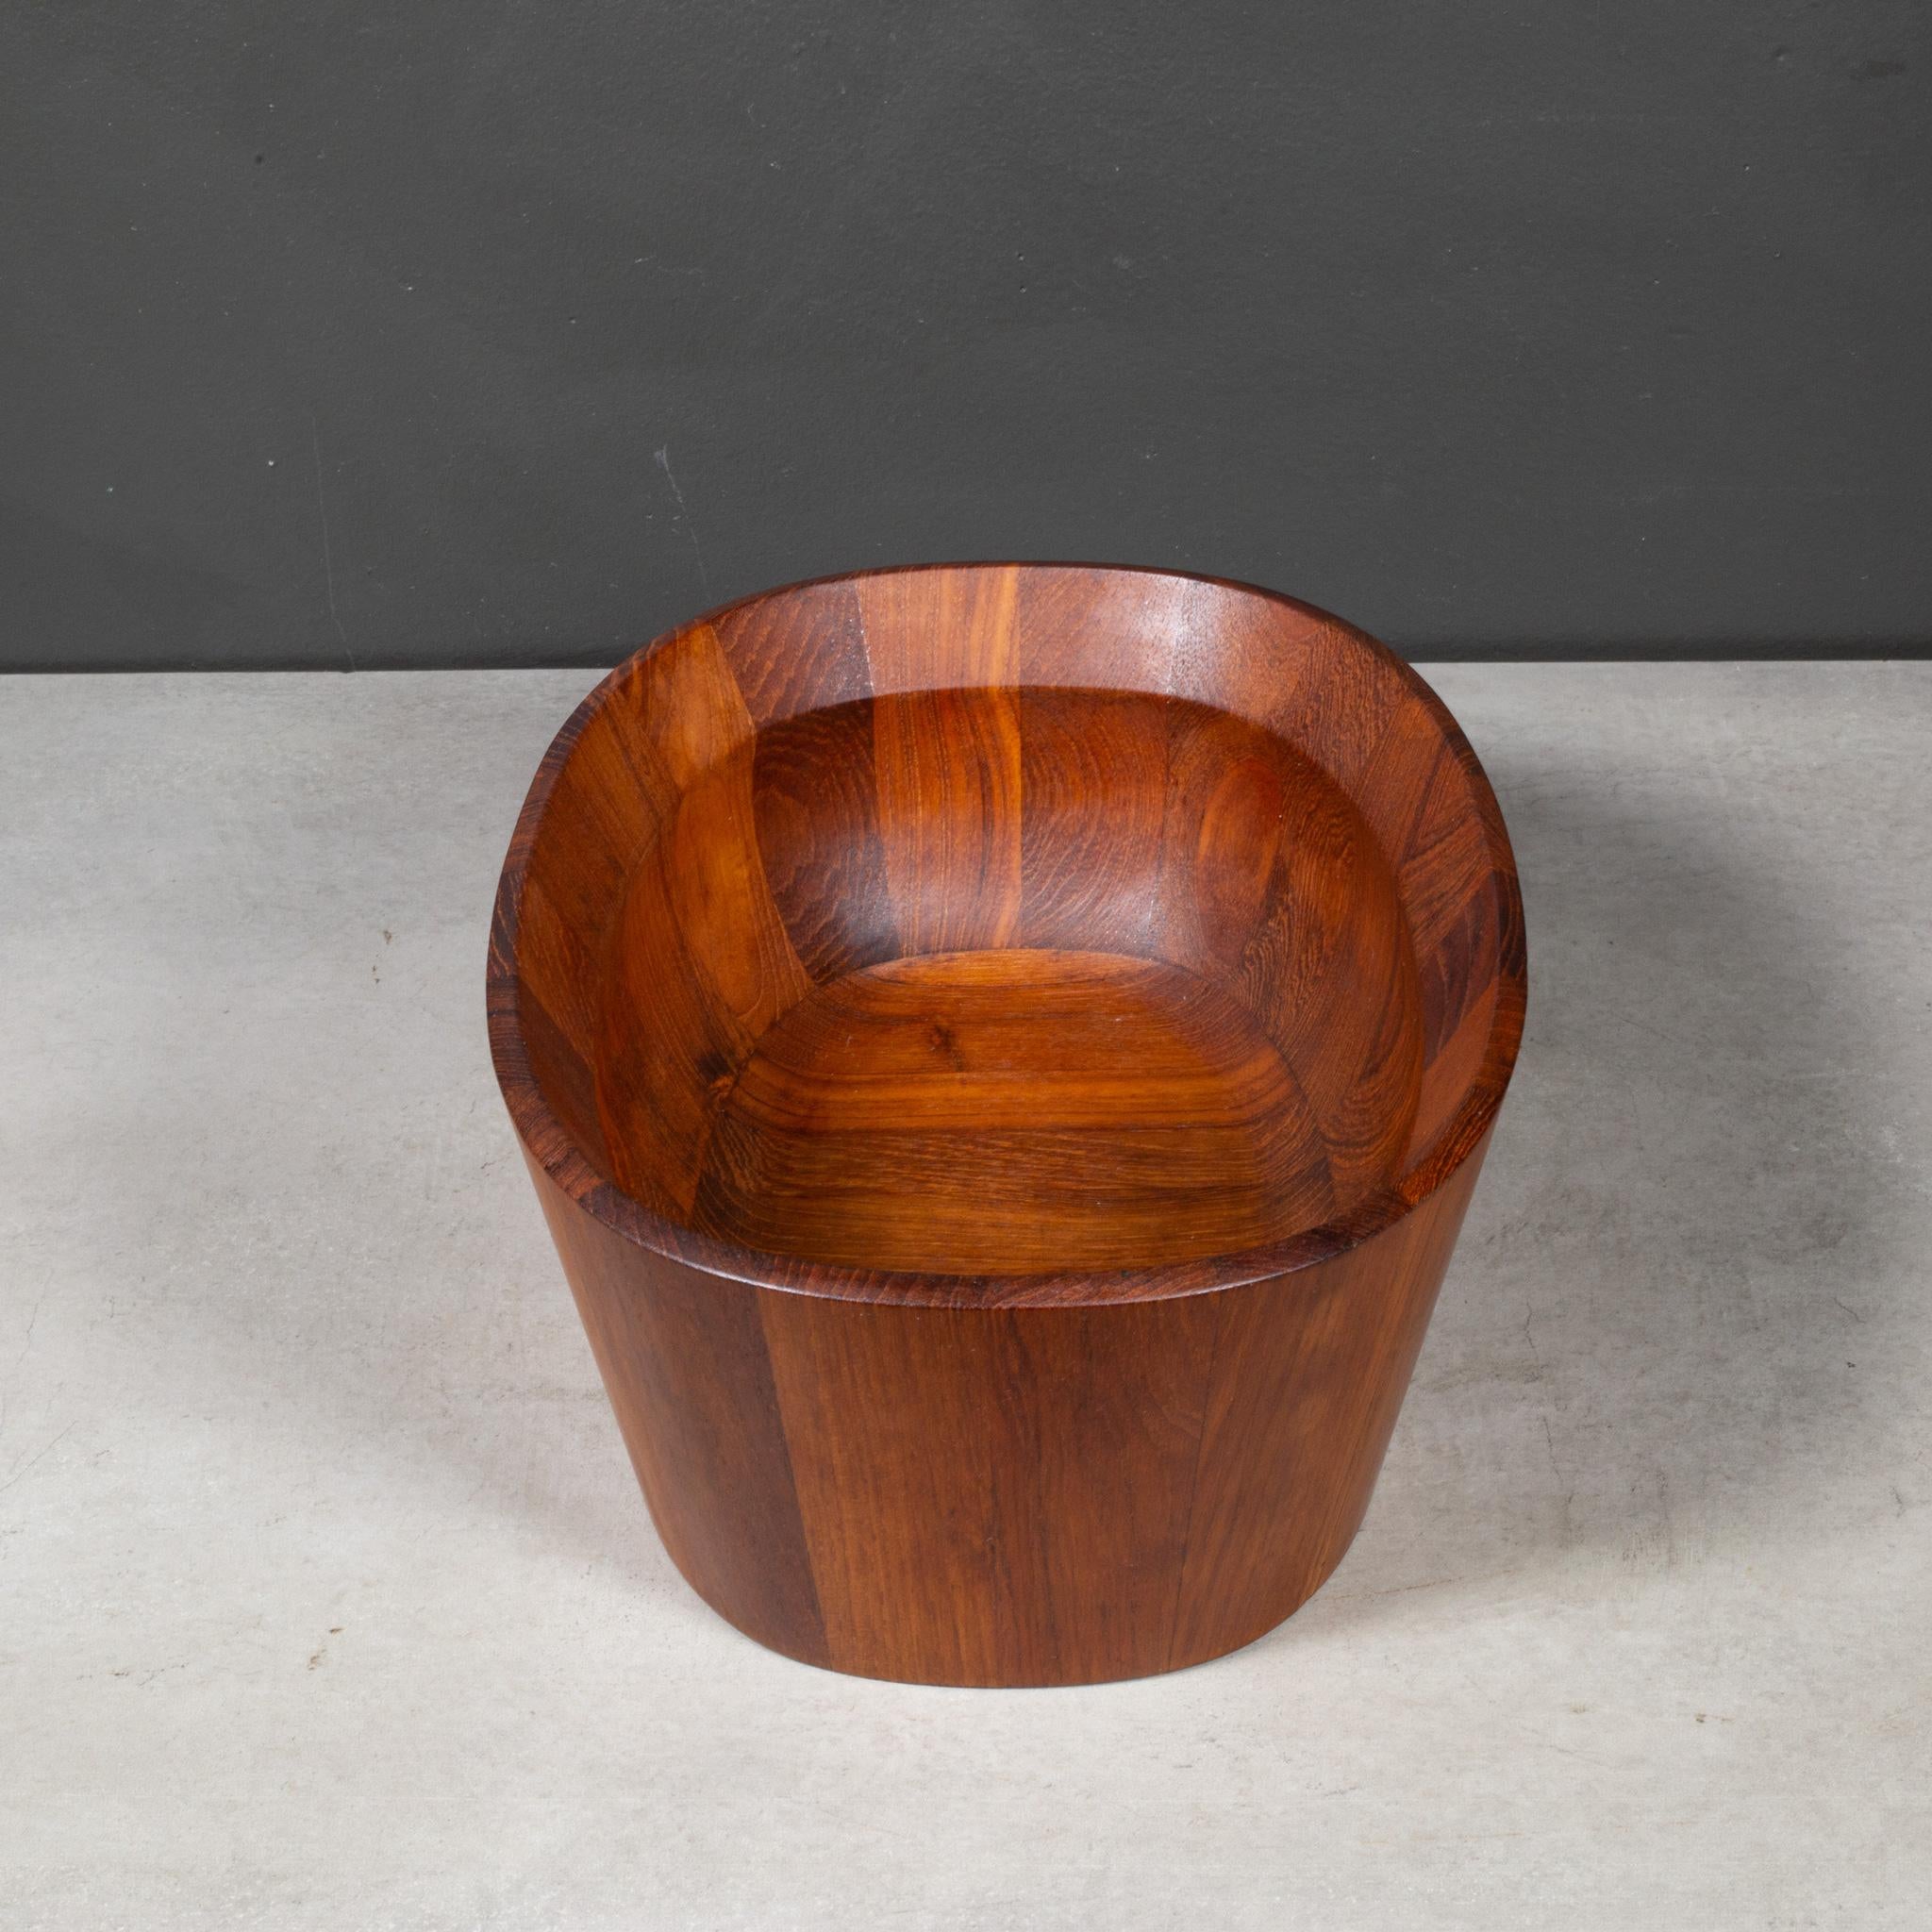 ABOUT

A Mid-century Teak oval shaped bowl designed by Jens H. Quistgaard. This piece has the 4 duck markings and 